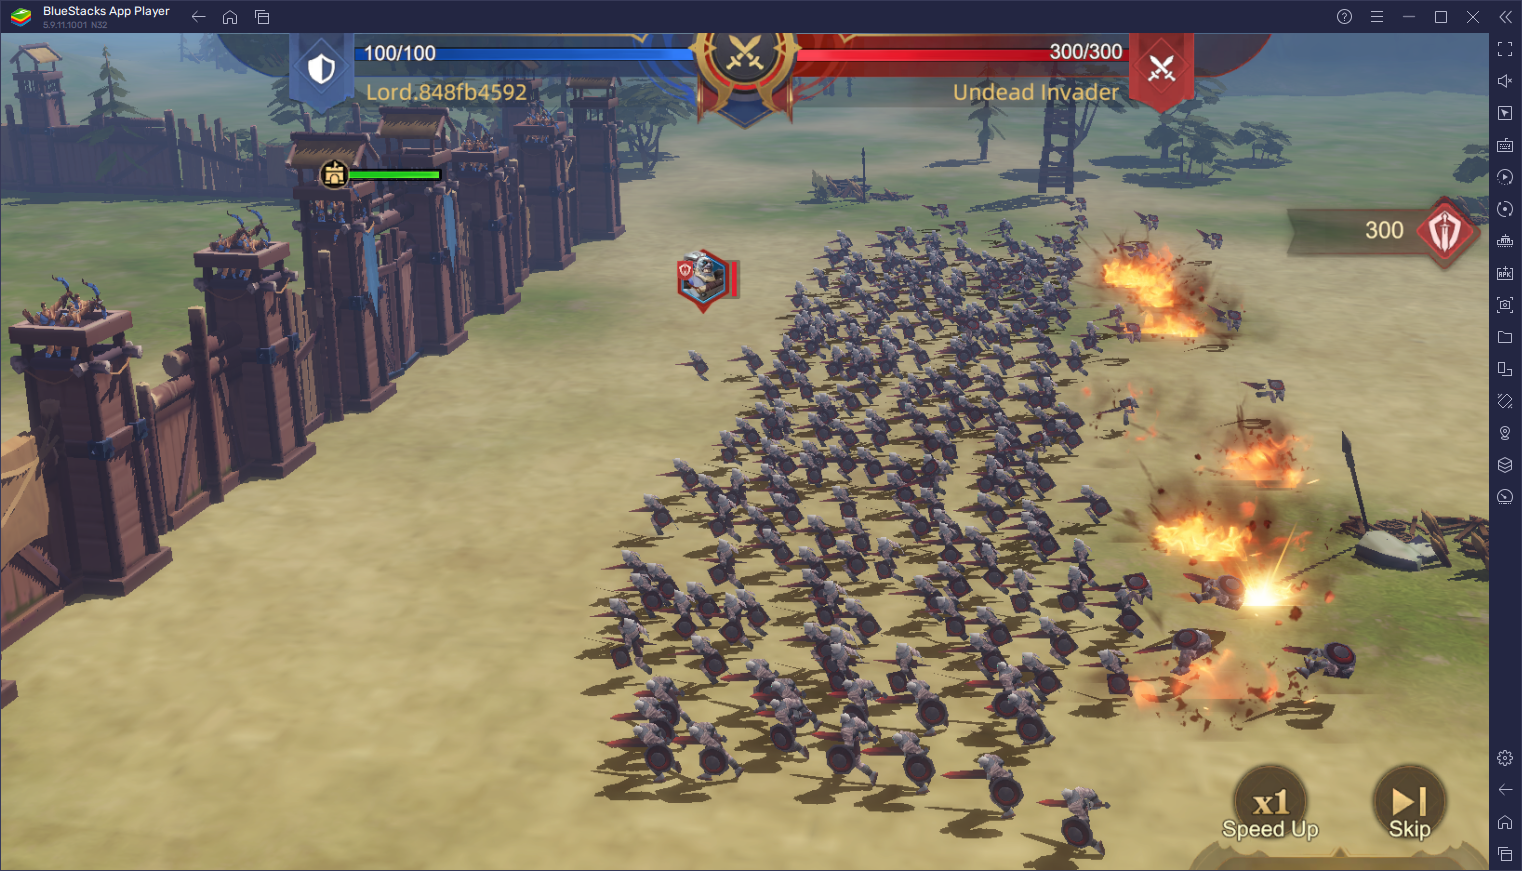 Land of Empires: Immortal on PC - How to Optimize Your Progression Using Our BlueStacks Tools